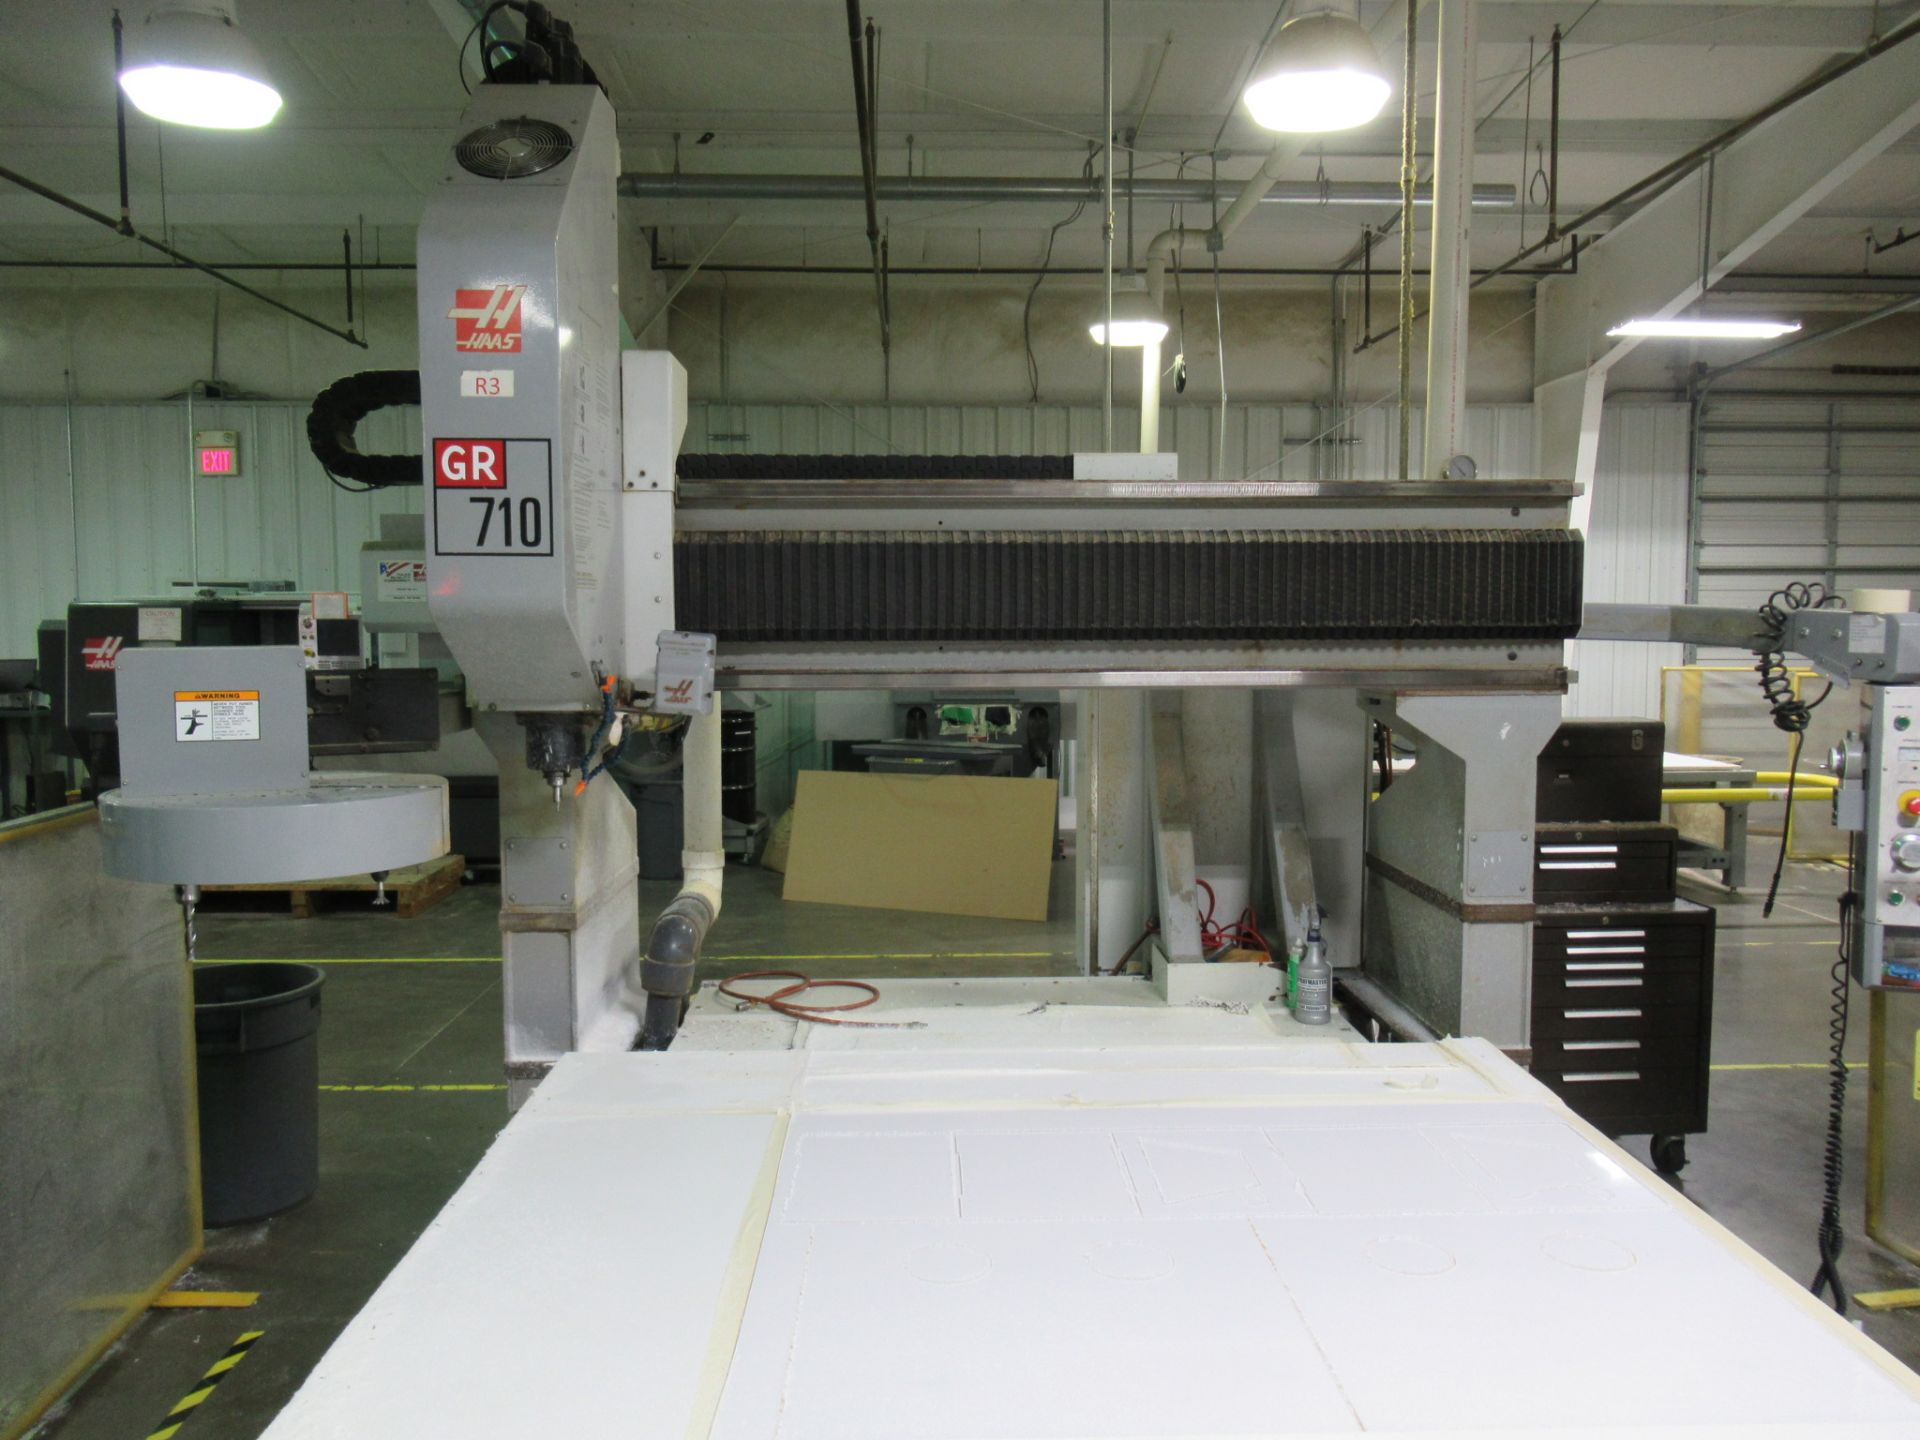 CNC GANTRY MACHINING CENTER, HAAS GR-710, New in 2006, 84” x 120” vacuum table, Travels: 121”-X, - Image 2 of 4